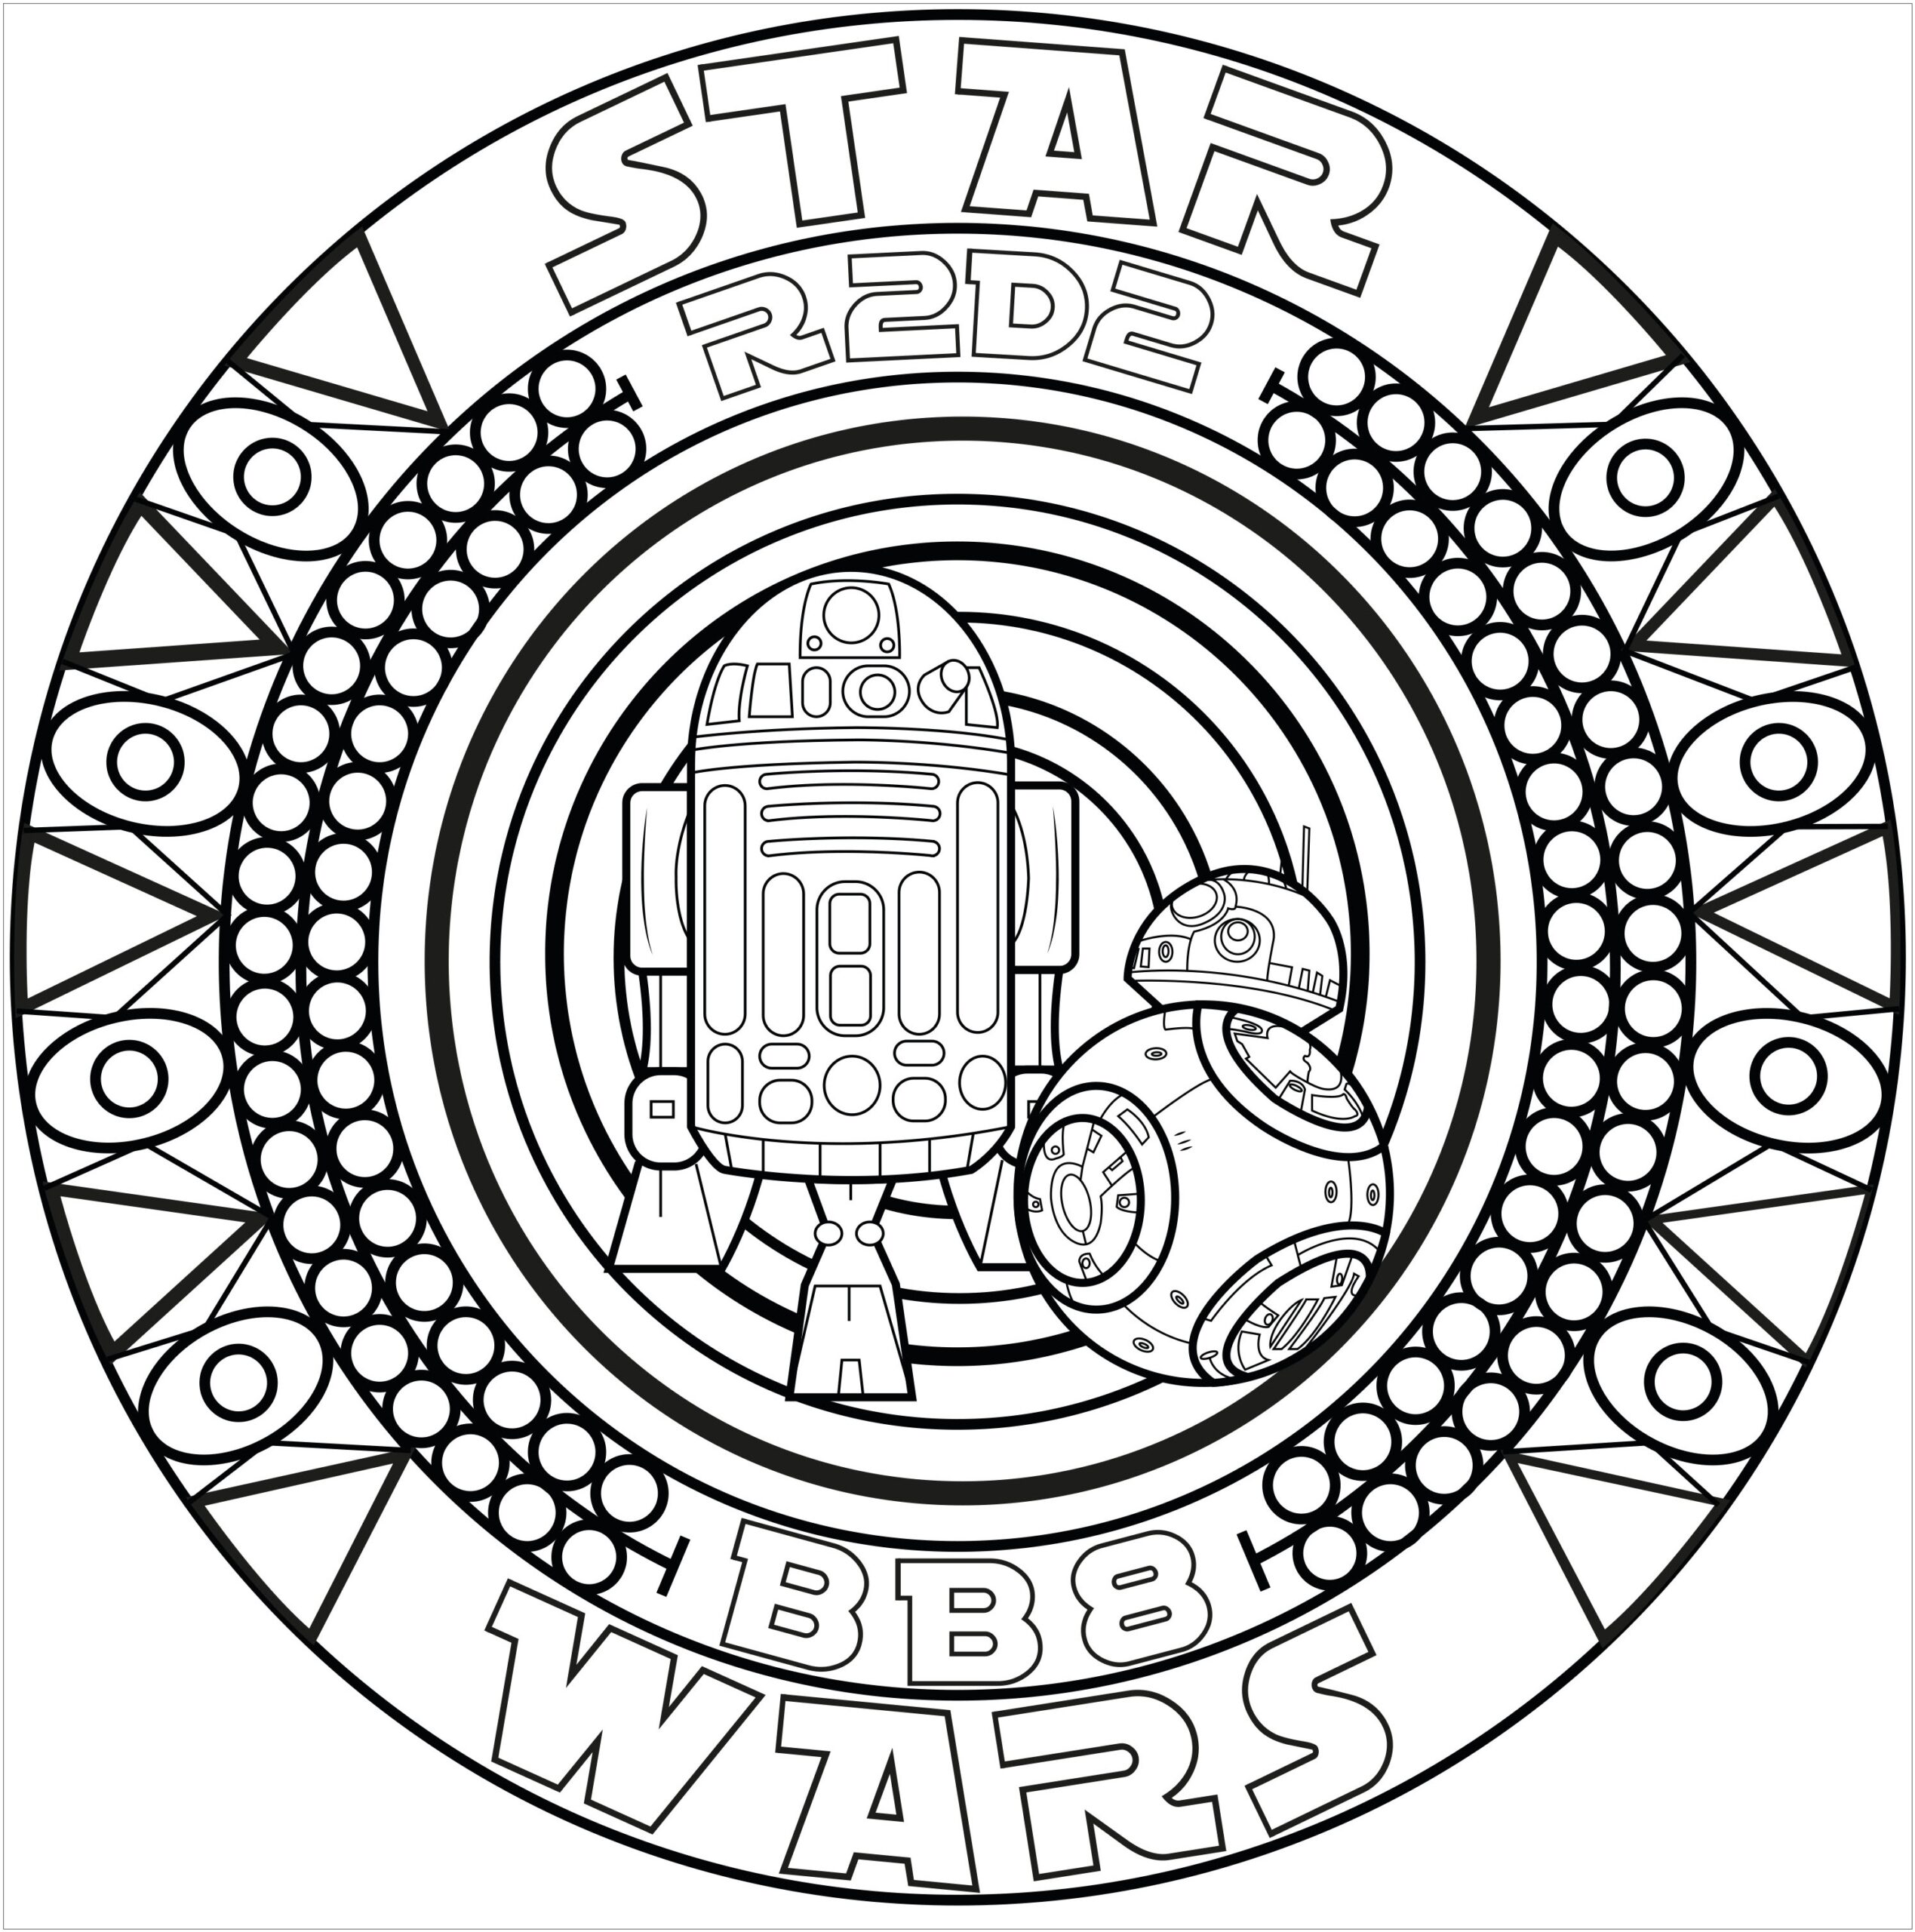 A Mandala Inspired By Star Wars With The Robots bb and r2d2